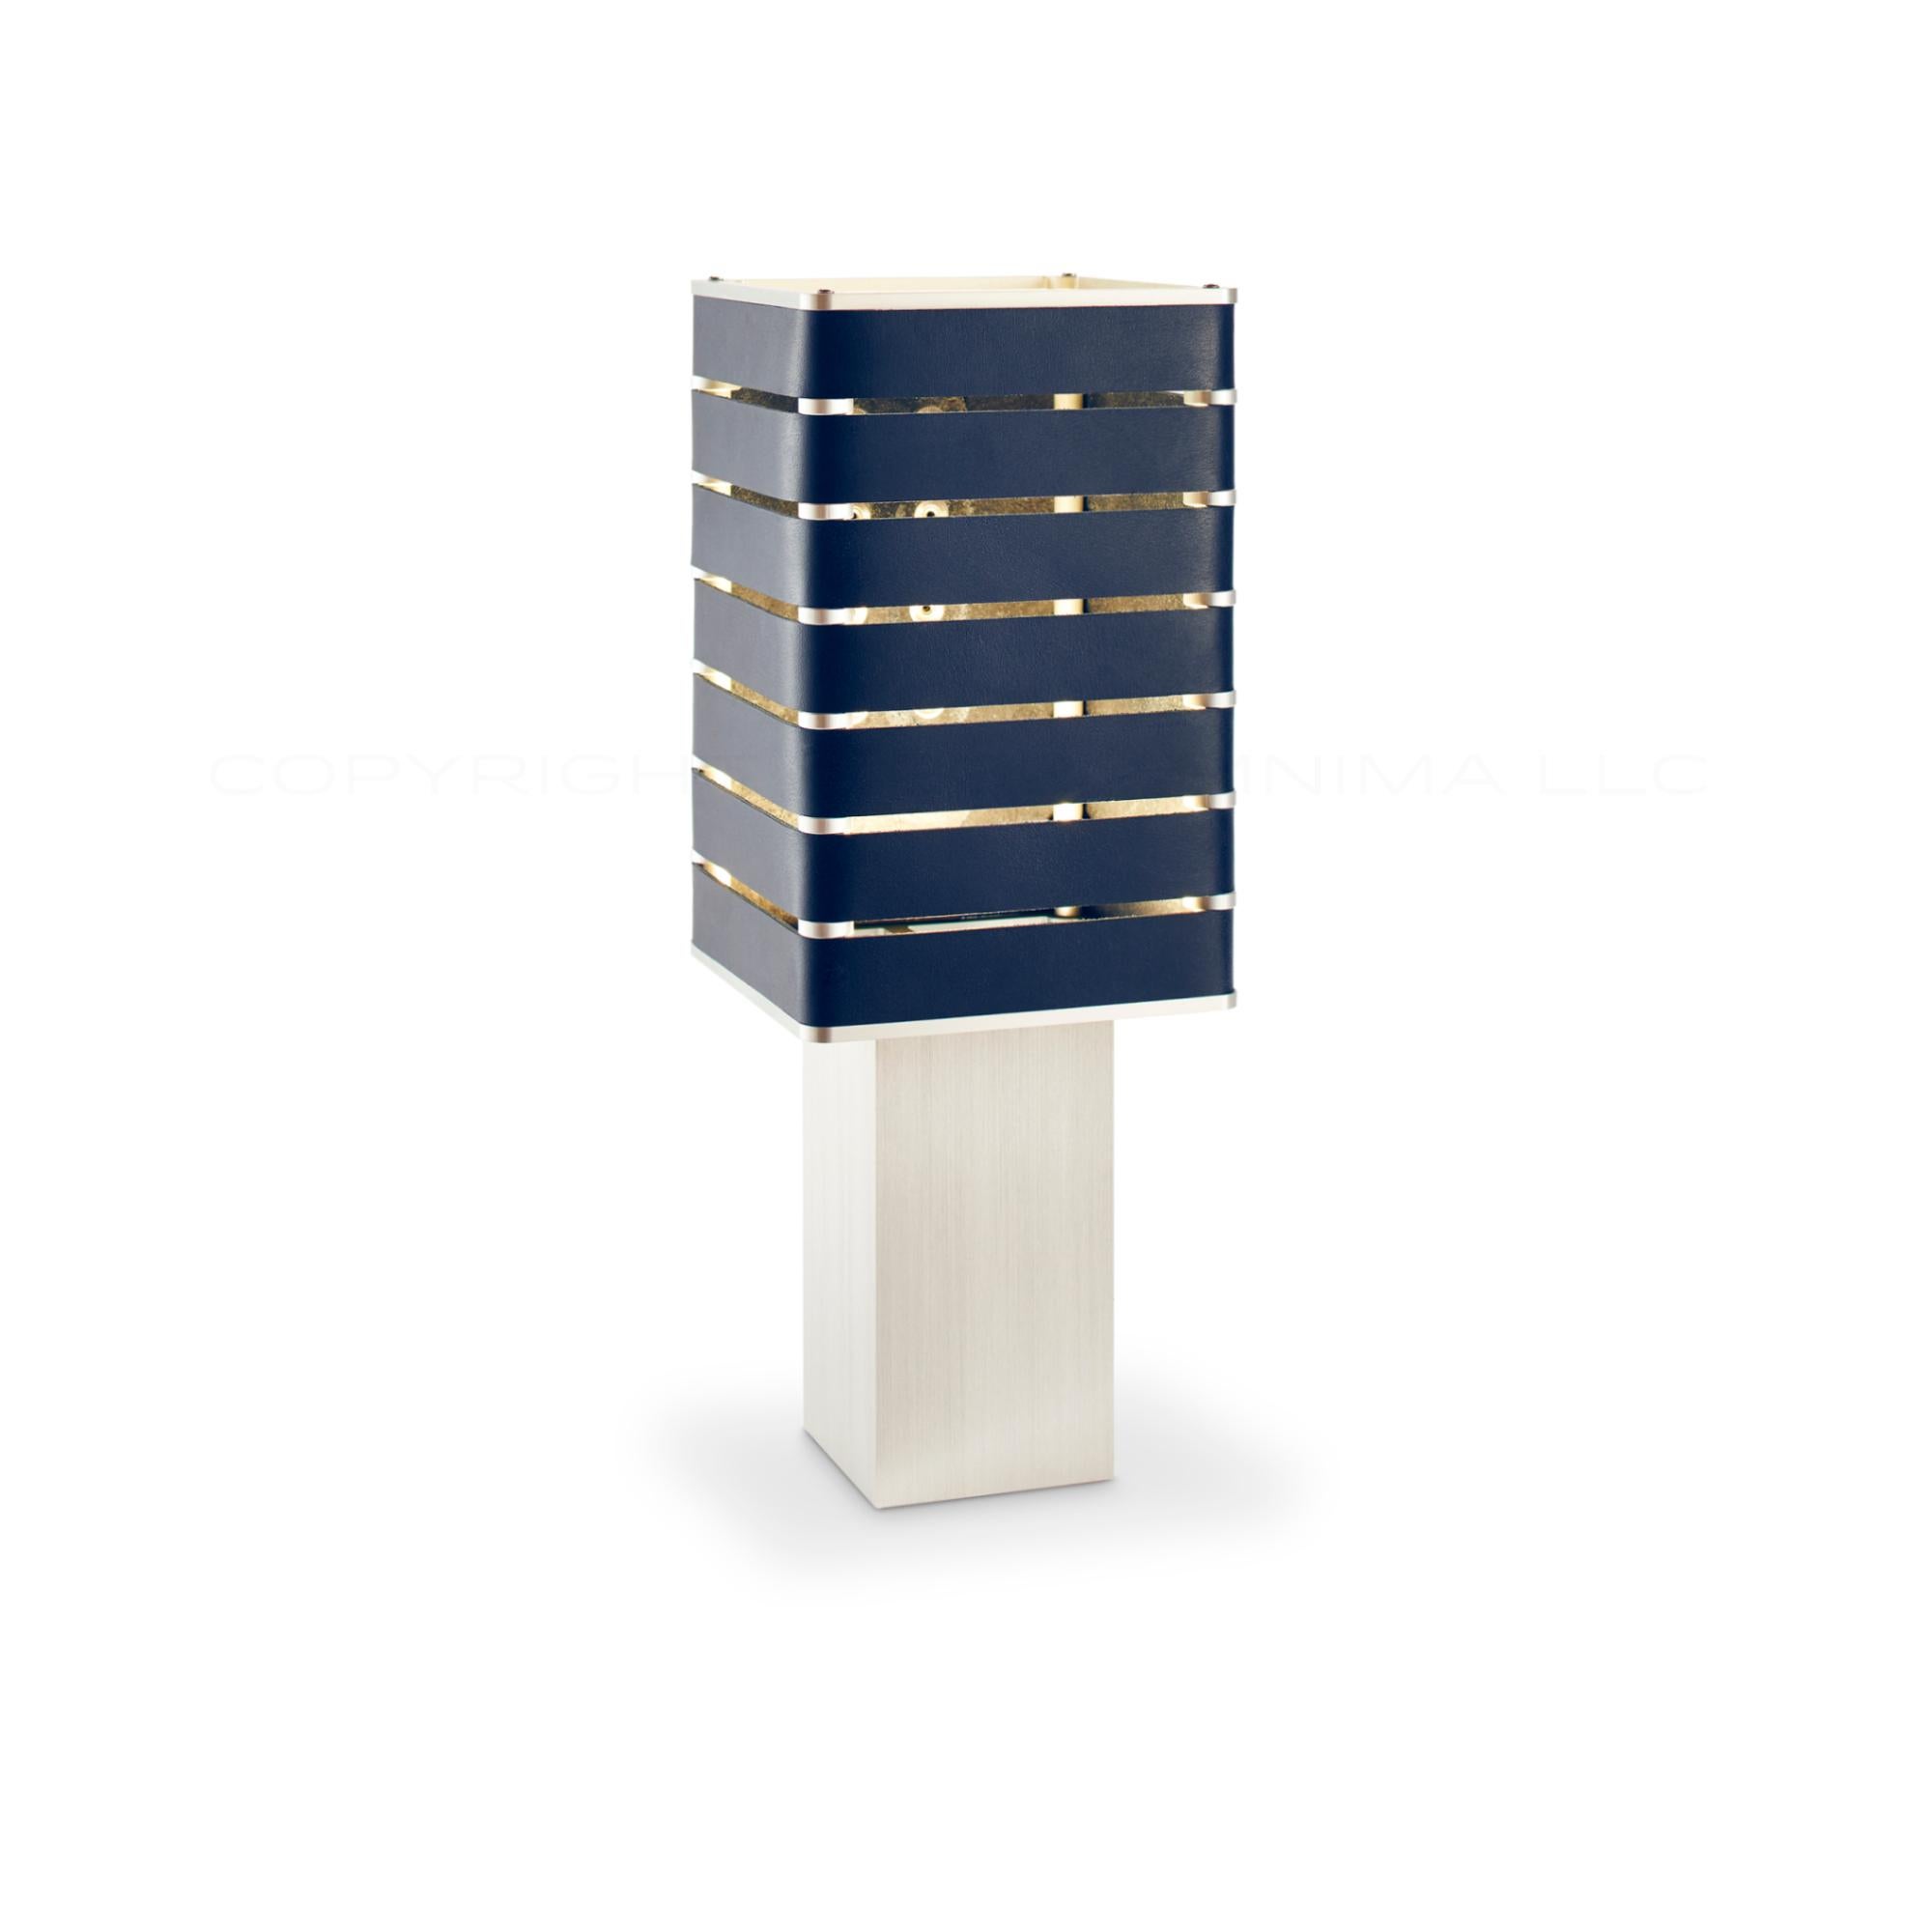 American Modern, Minimal, Solid Metal Table Light in Navy Blue Italian Leather